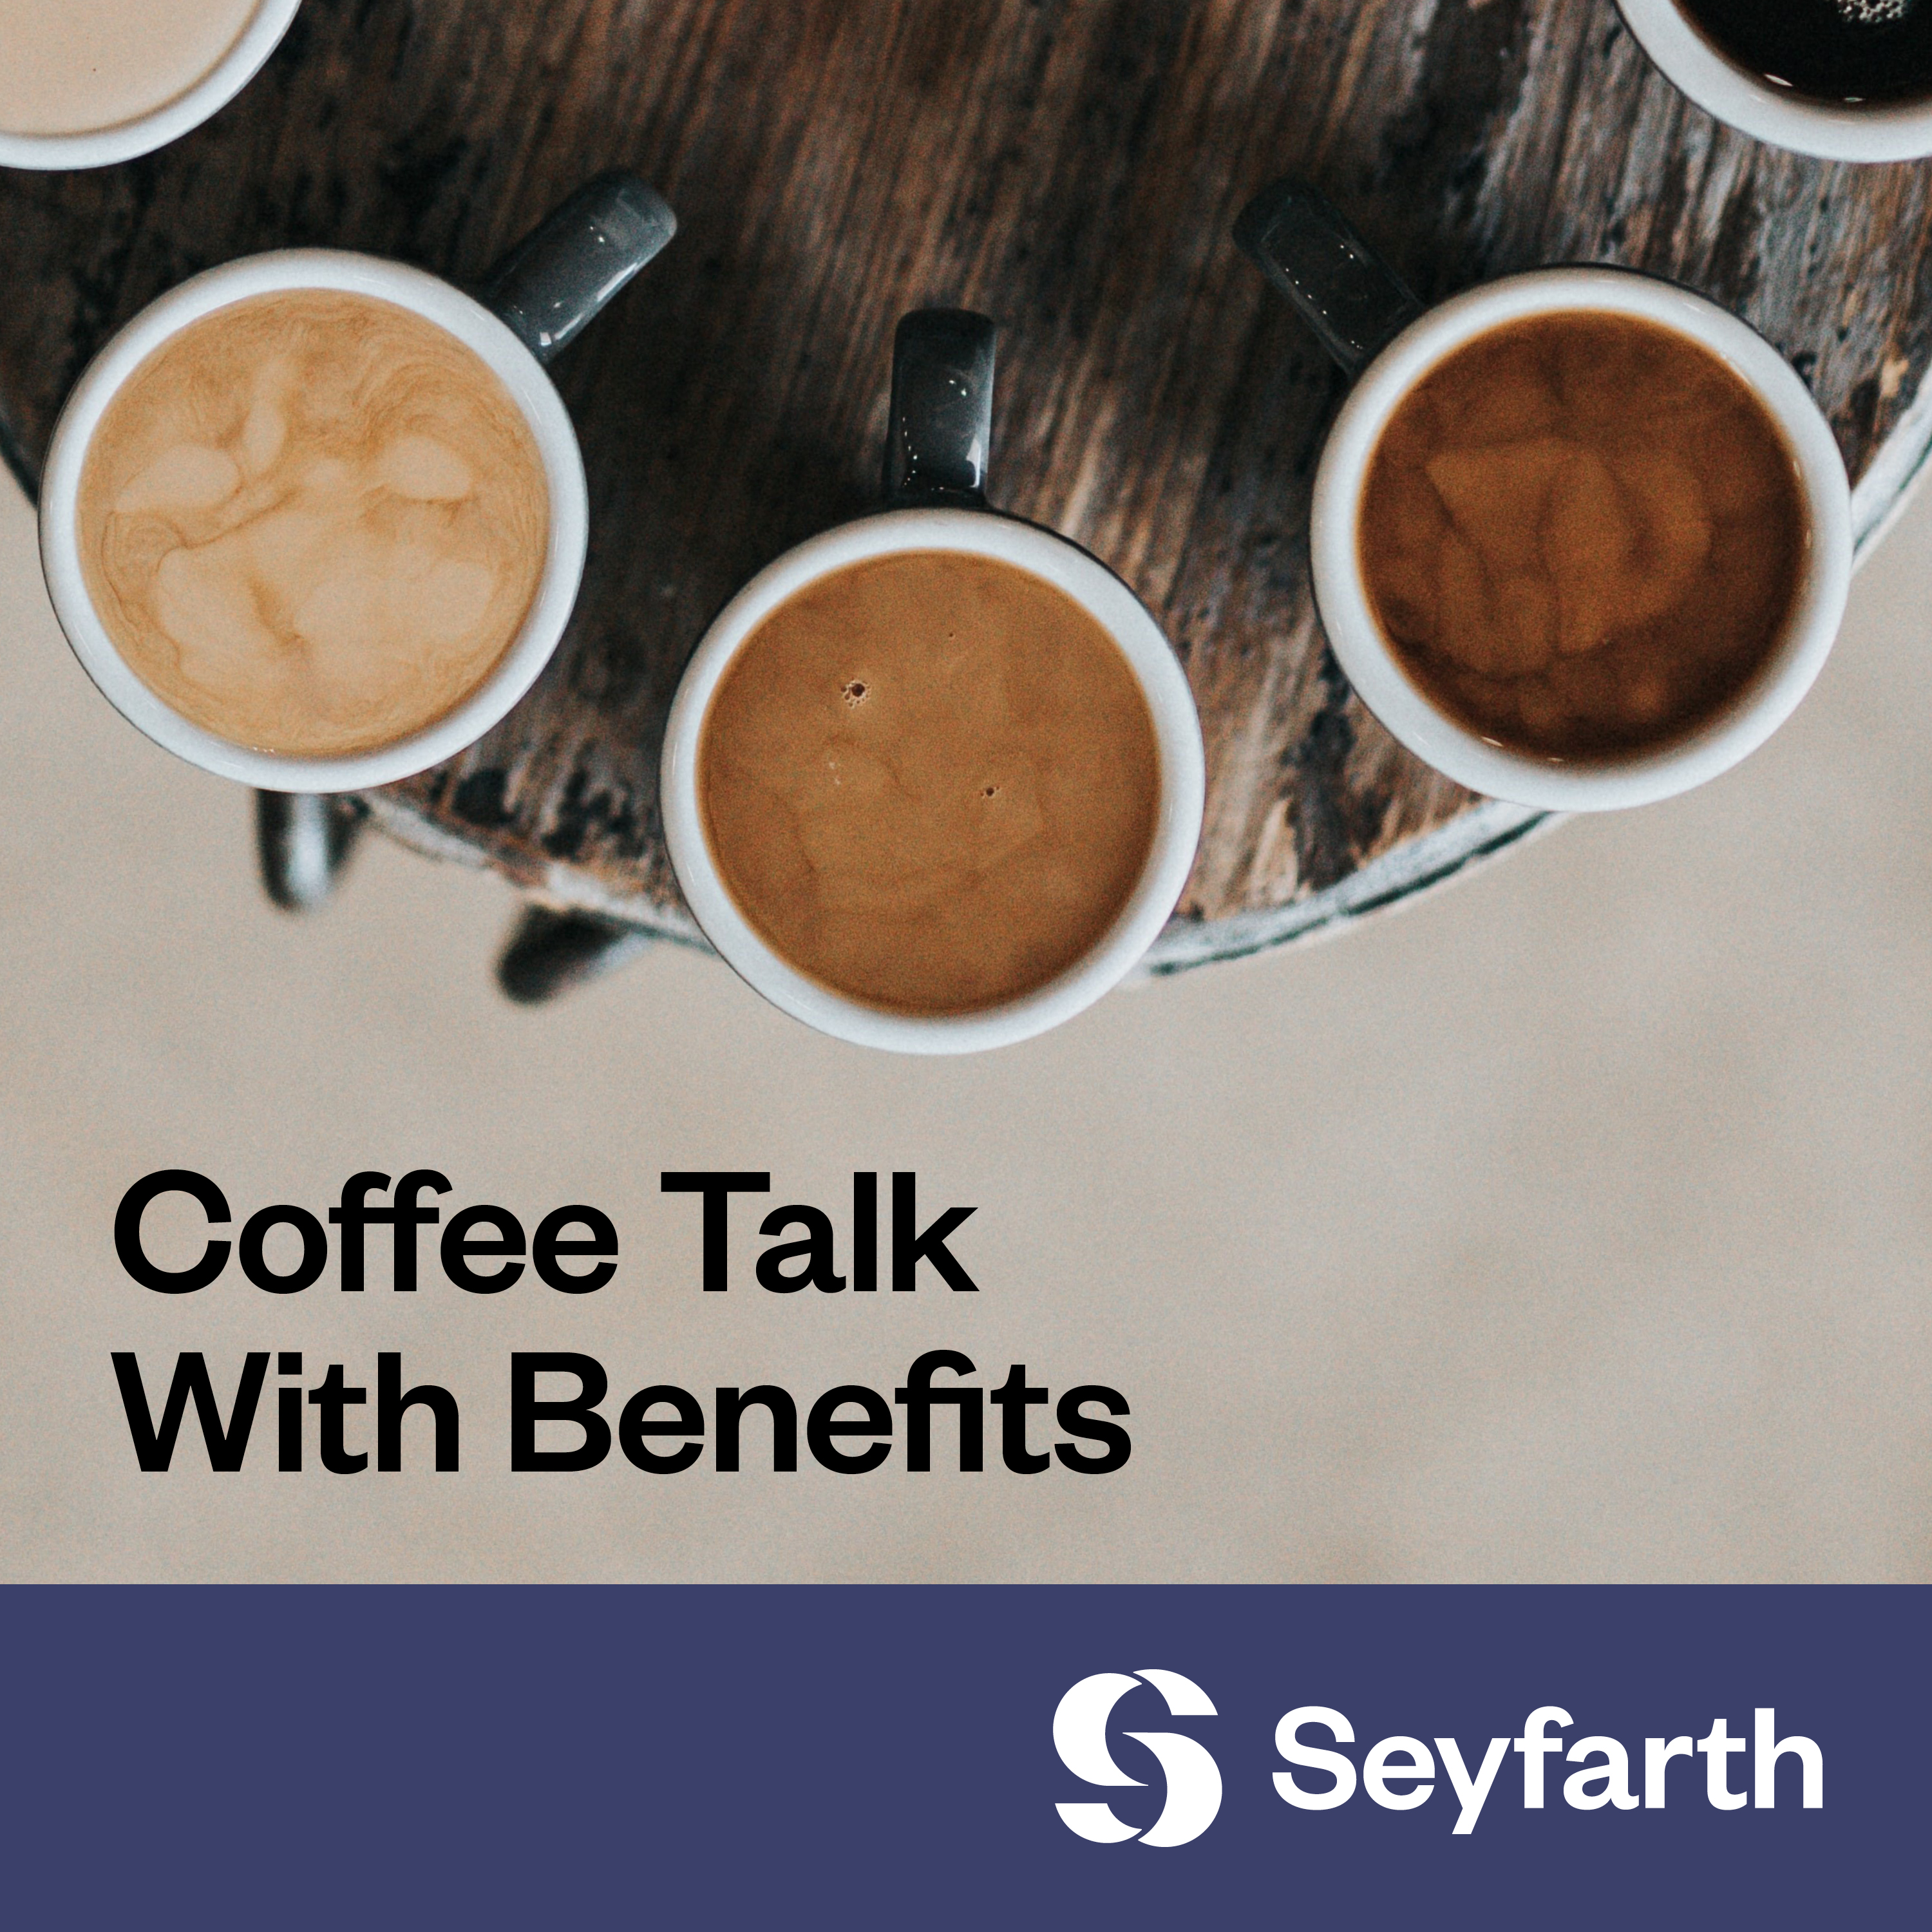 Coffee Talk With Benefits